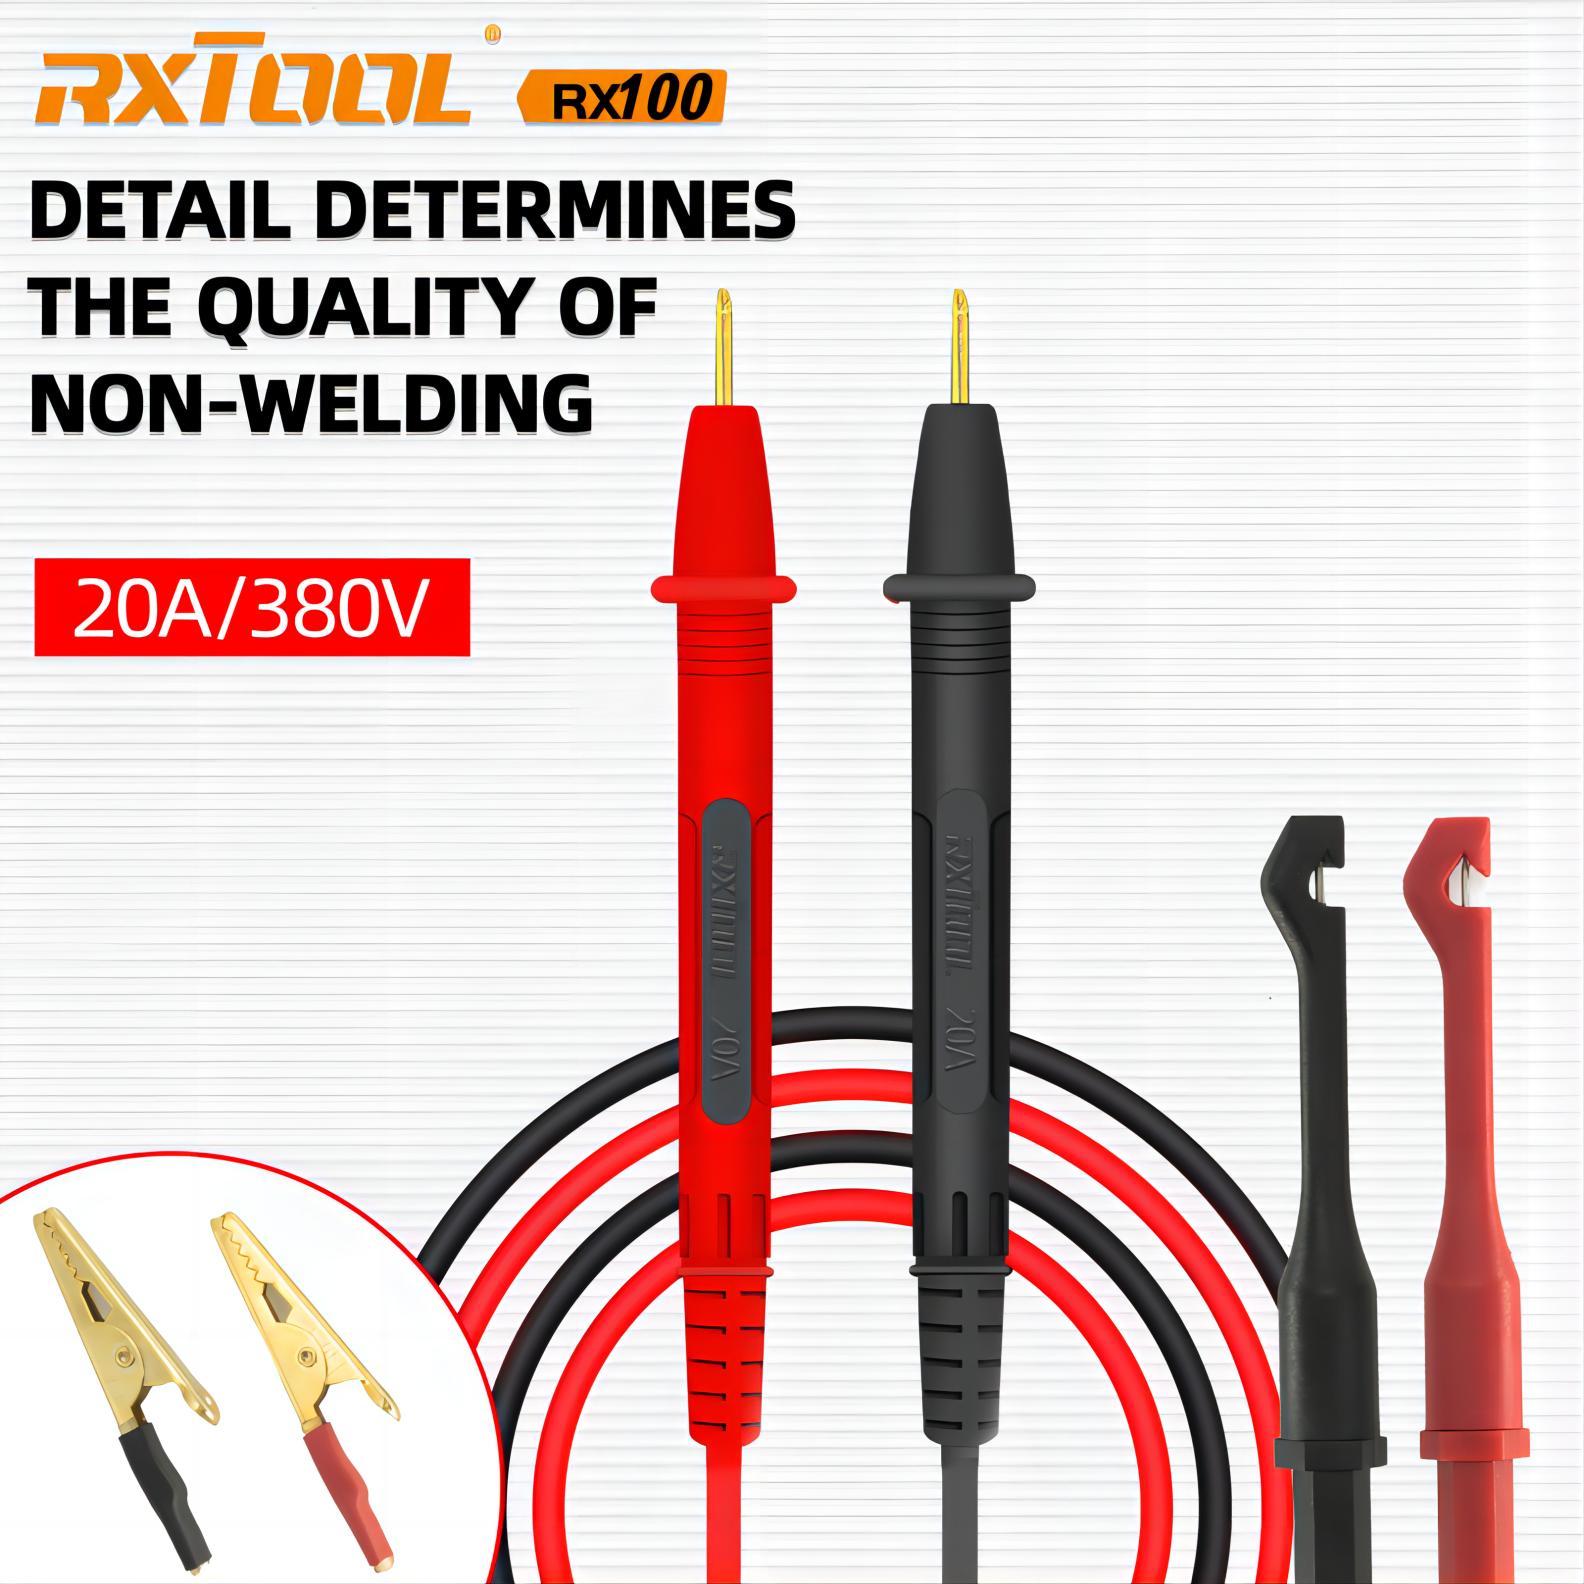 RXTOOL RX100 detail determines the quality of non-welding